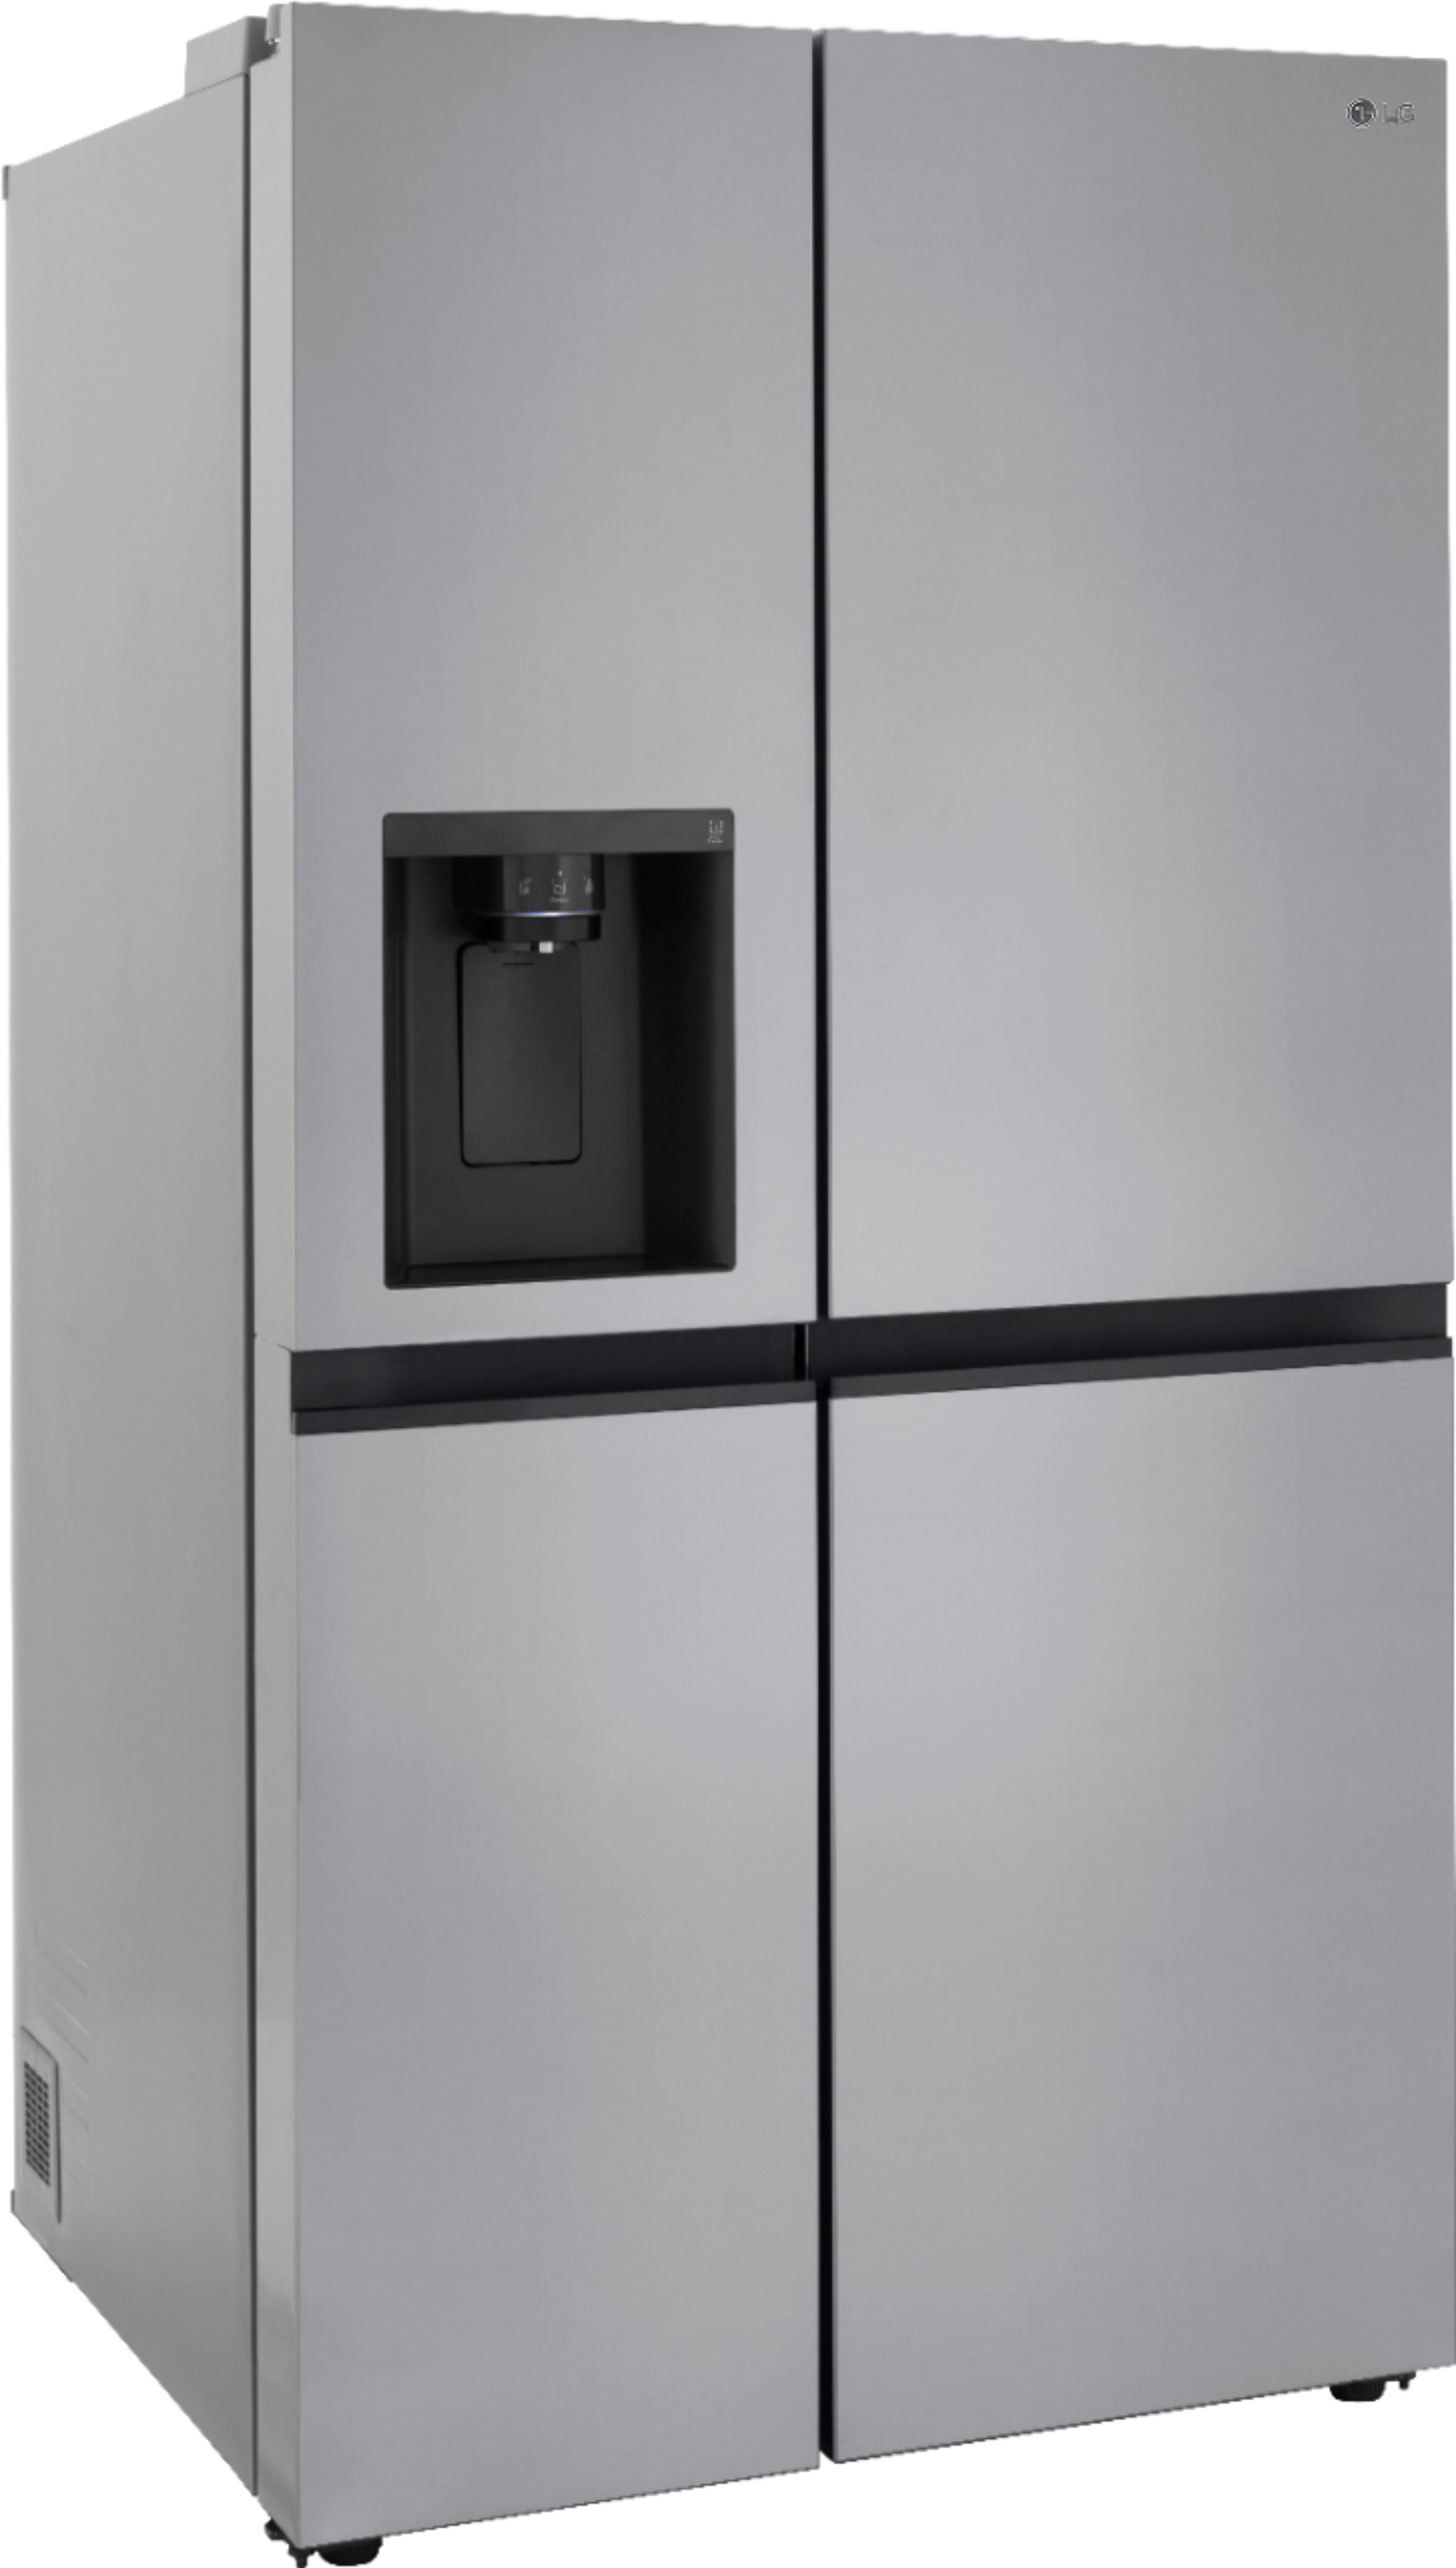 LG 27.2 Cu. Ft. Side-by-Side Refrigerator with SpacePlus Ice 